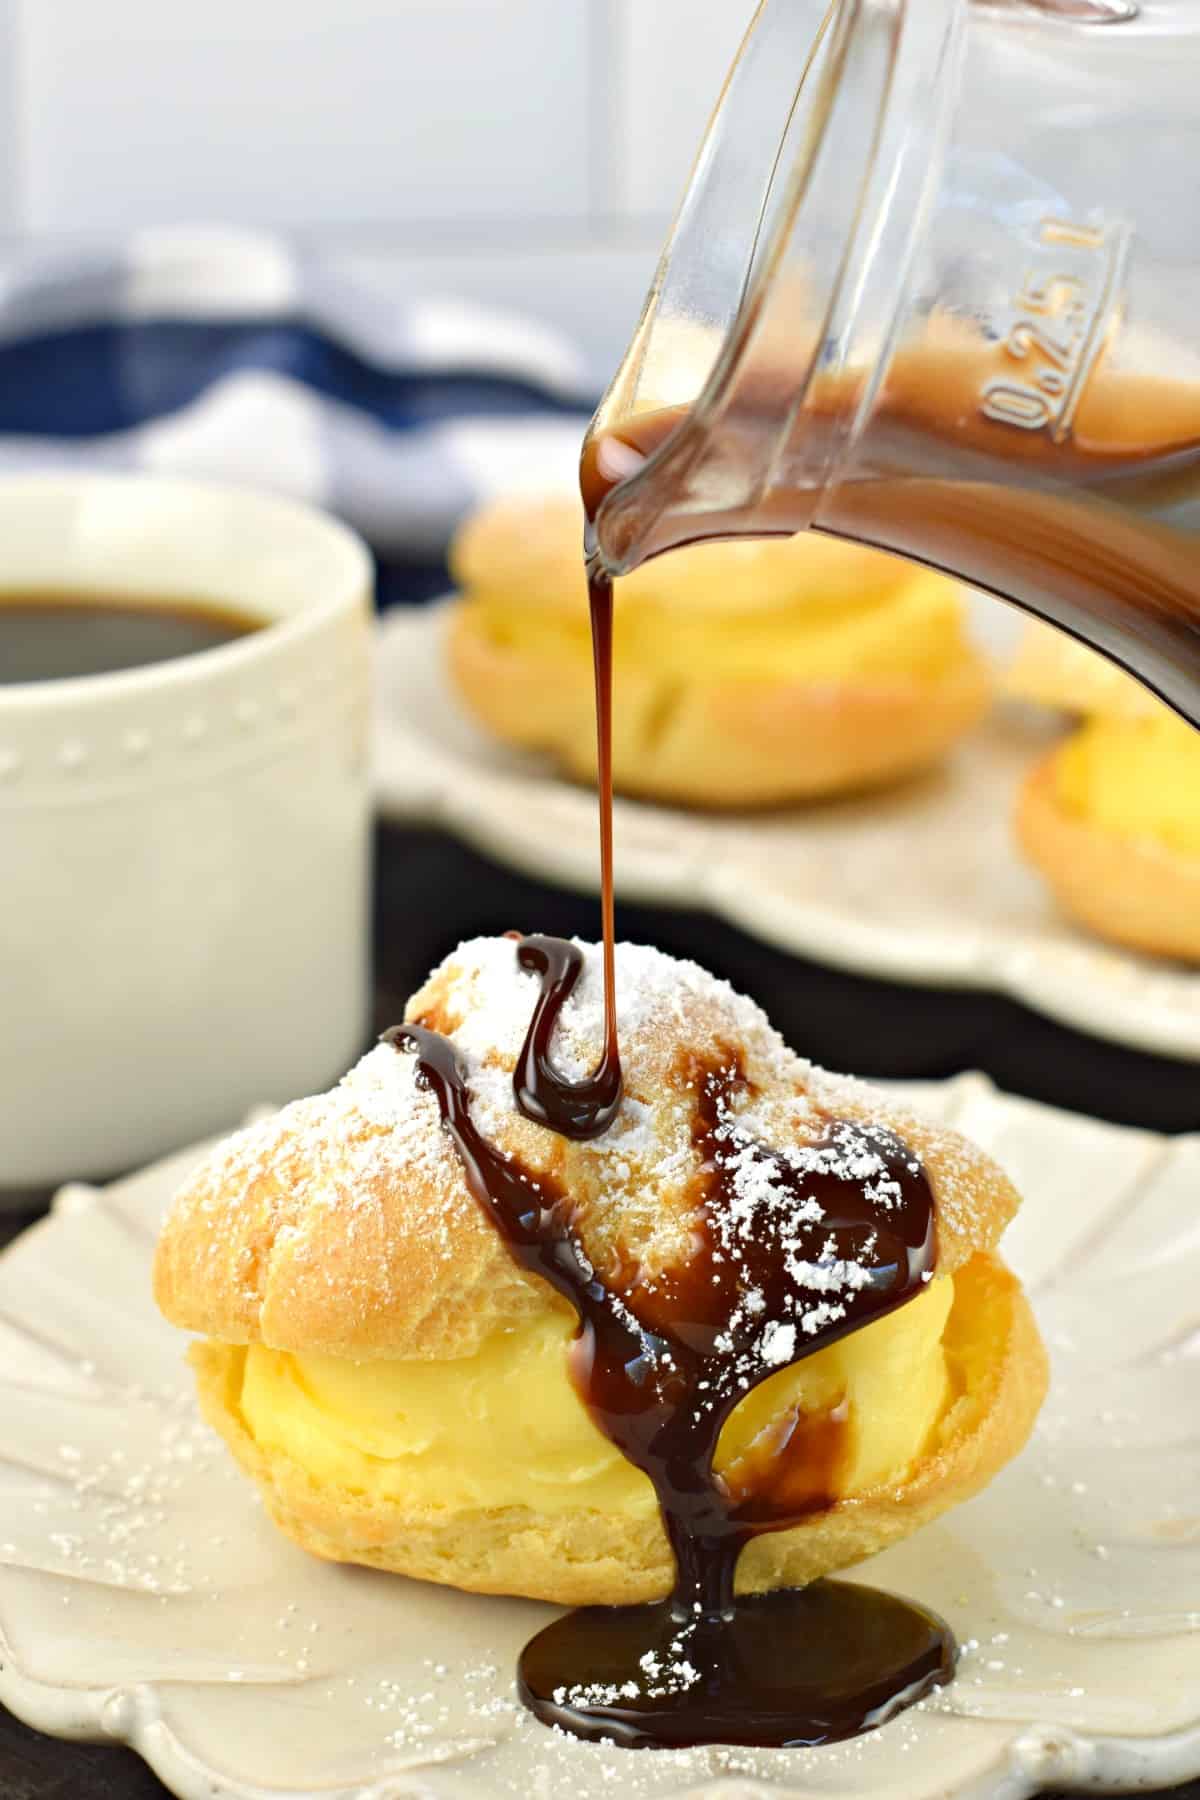 Chocolate syrup being poured over the top of a custard filled cream puff.